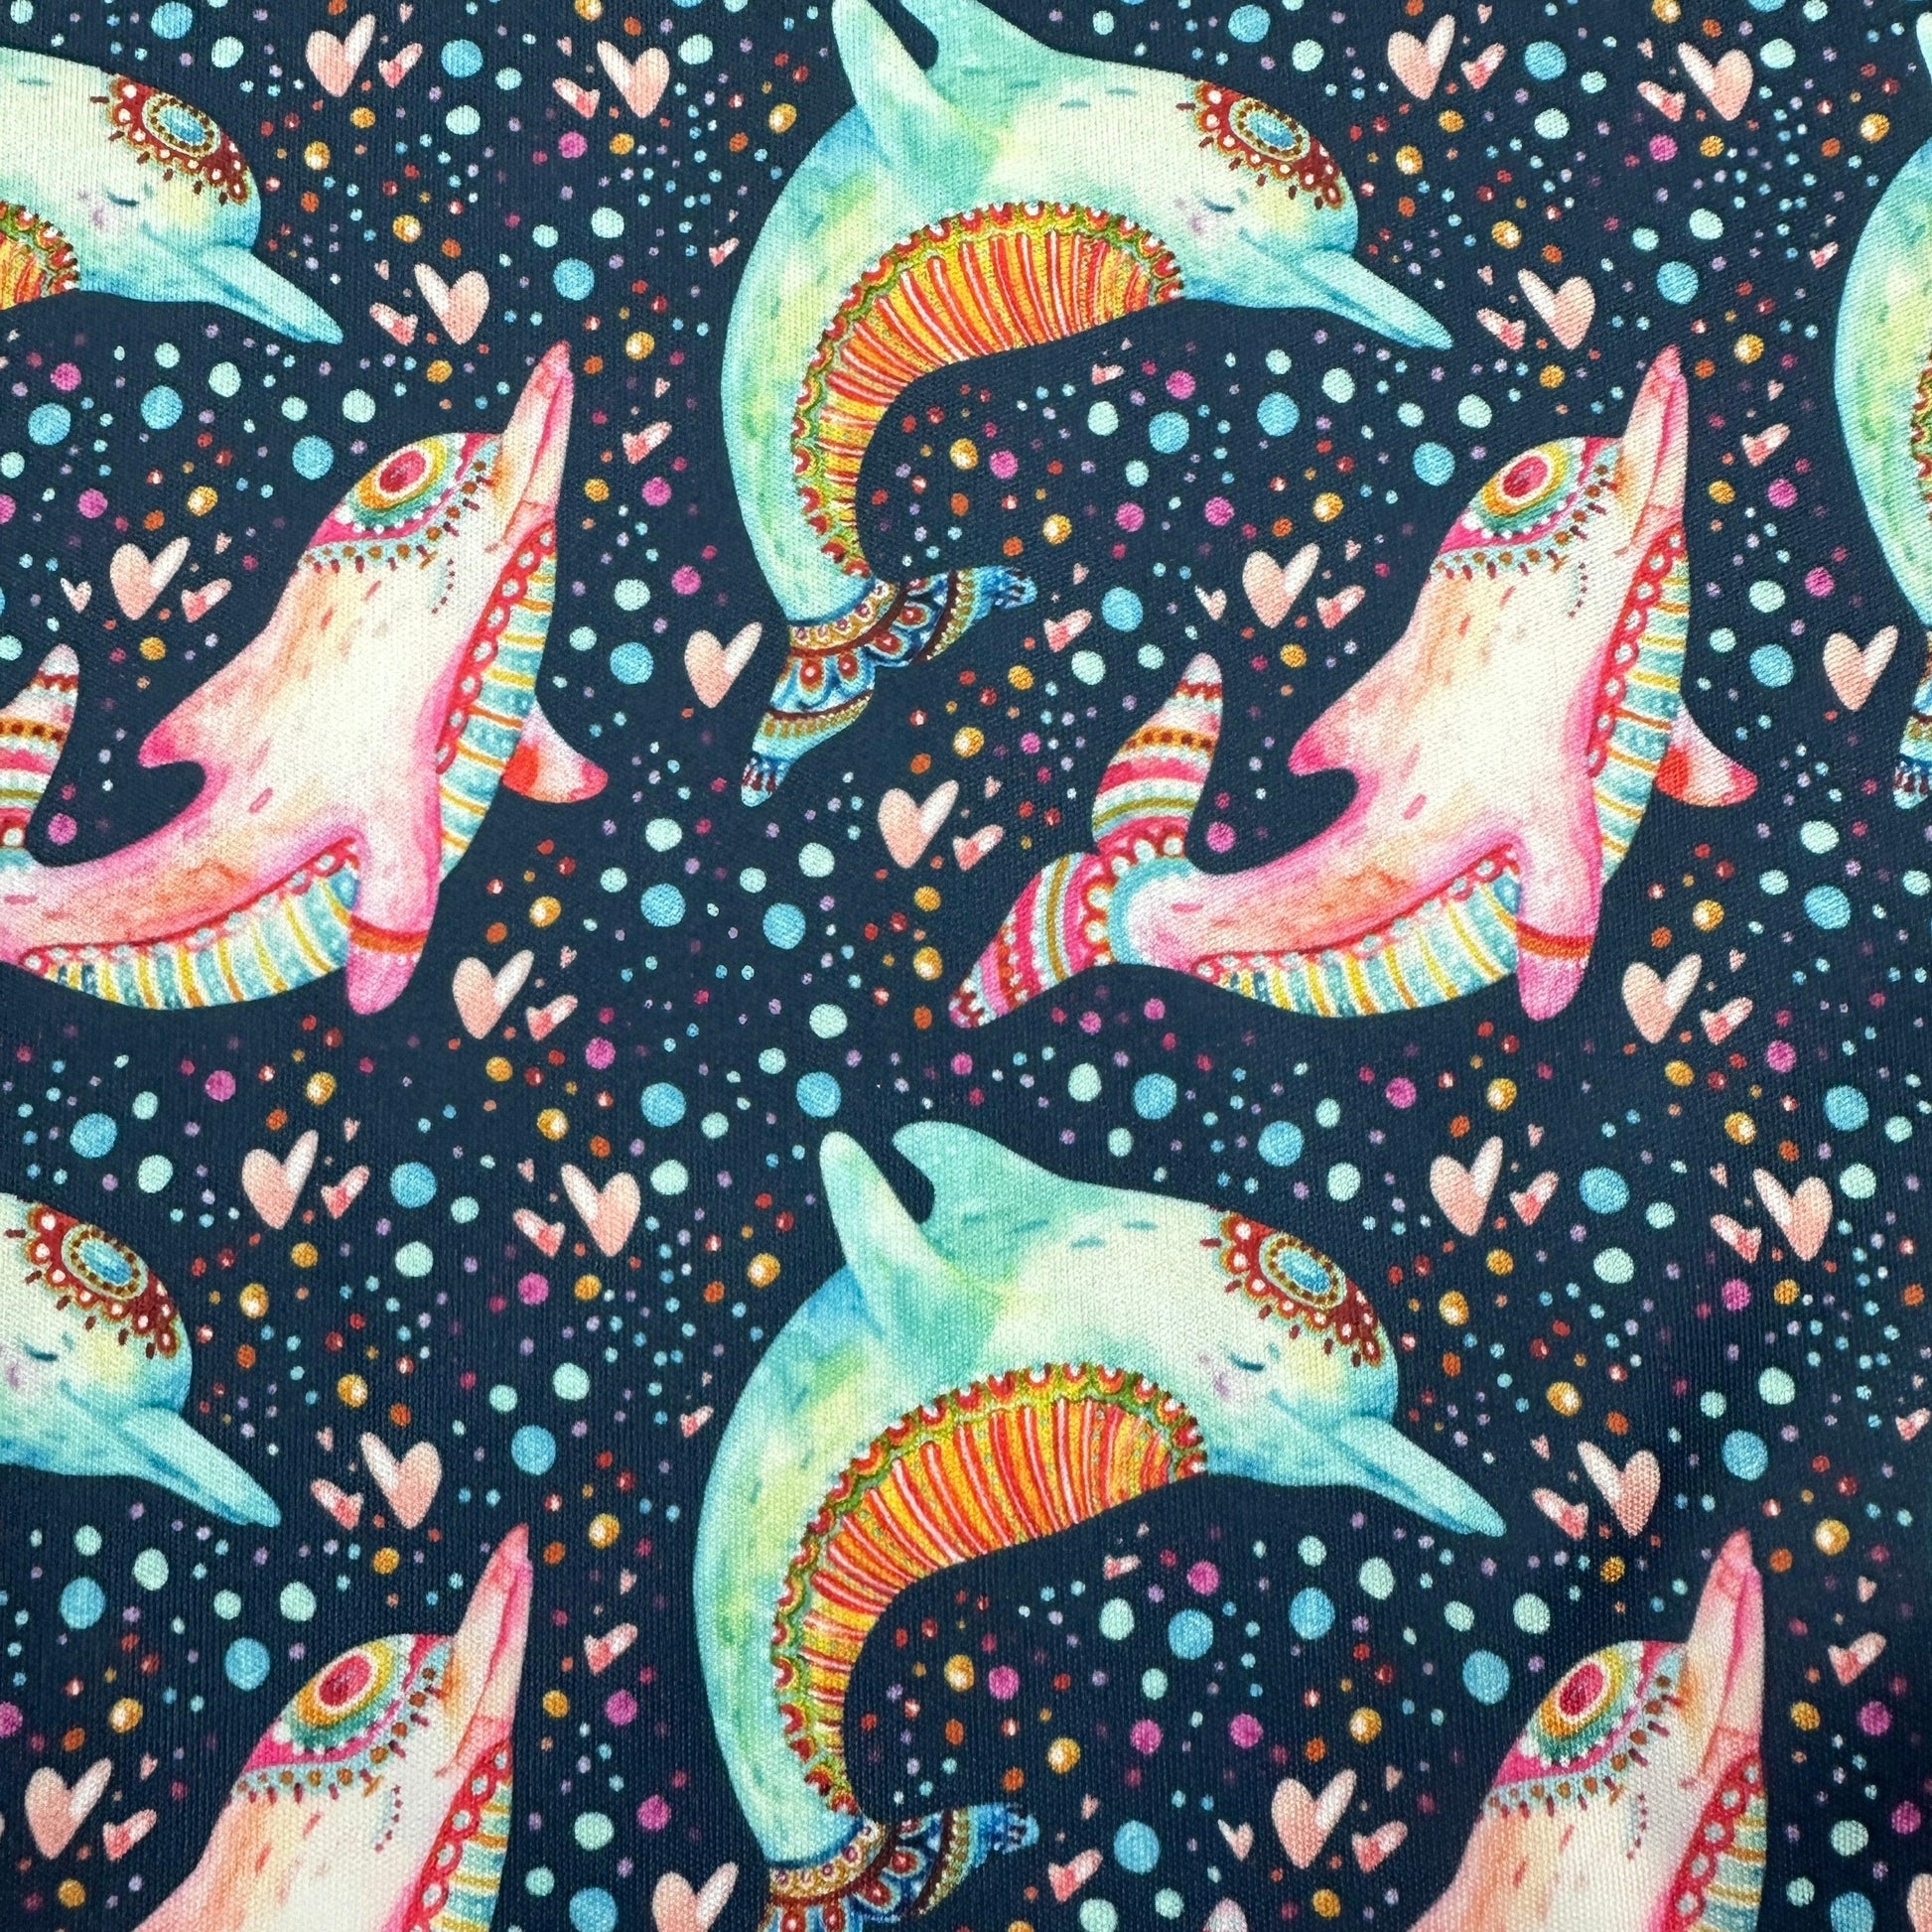 Dolphins 1 mil PUL Fabric - Made in the USA - Nature's Fabrics